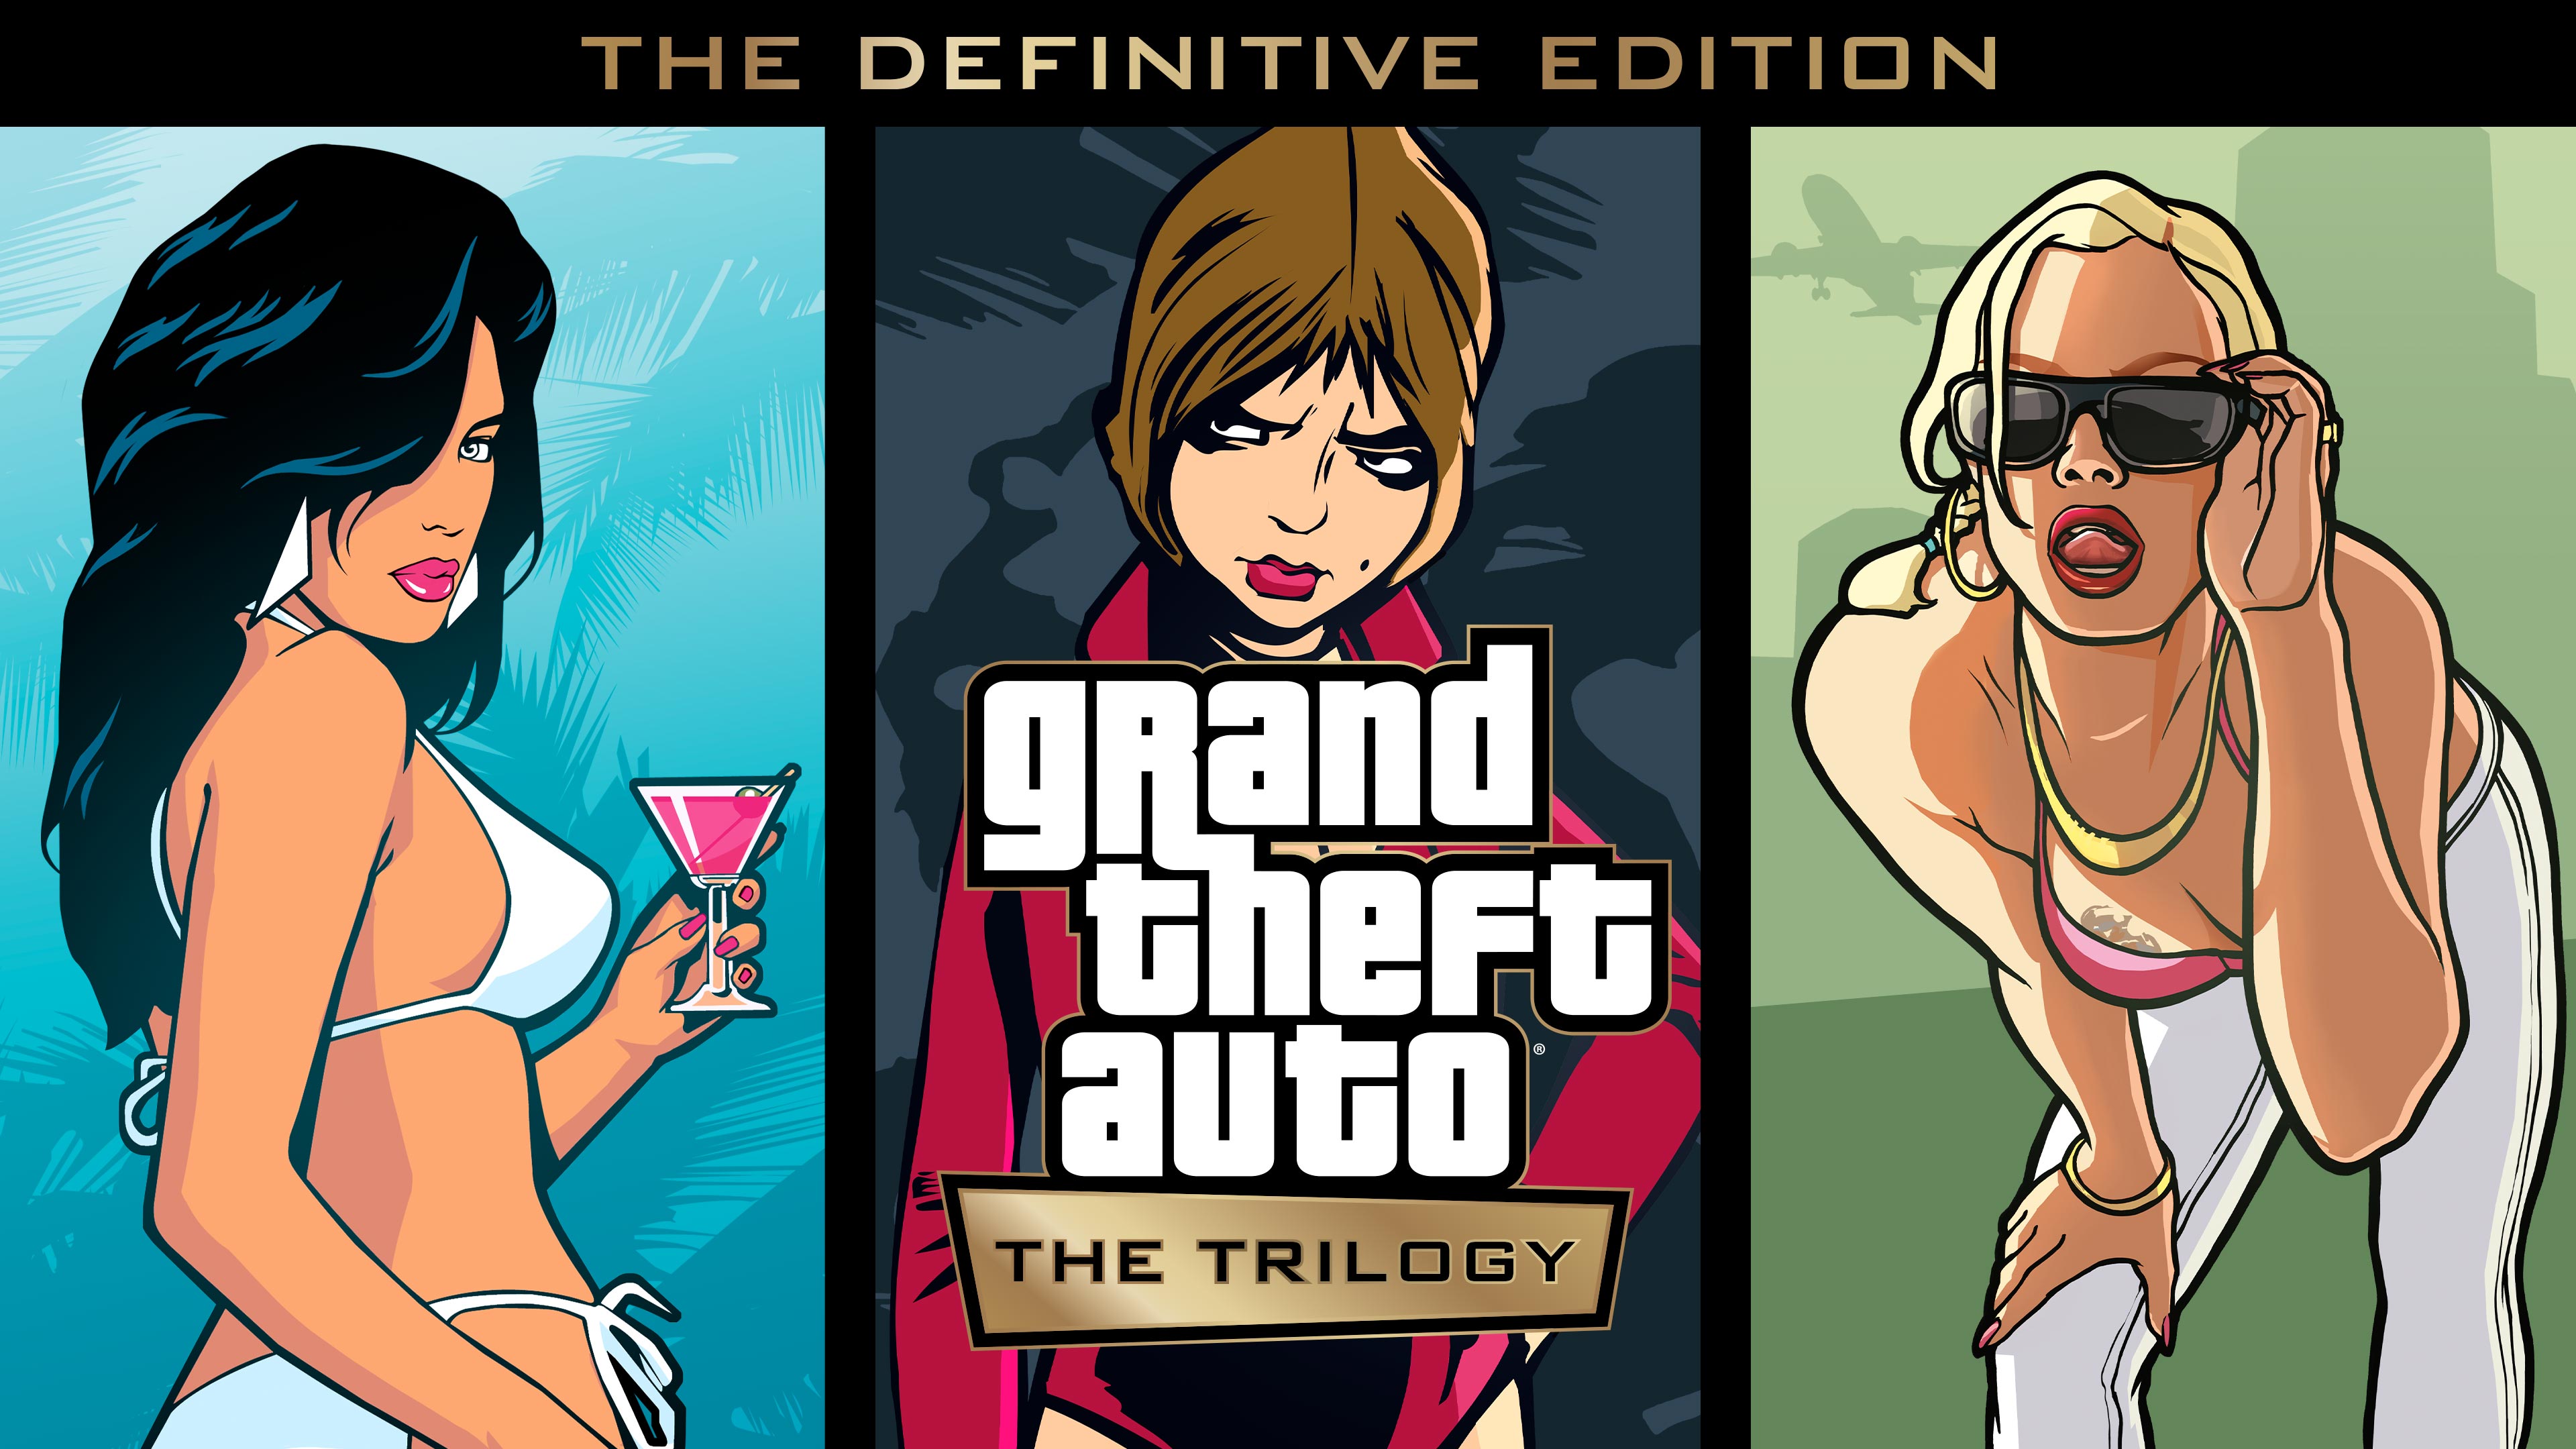 More information about "Grand Theft Auto: The Trilogy – The Definitive Edition nu op Steam"